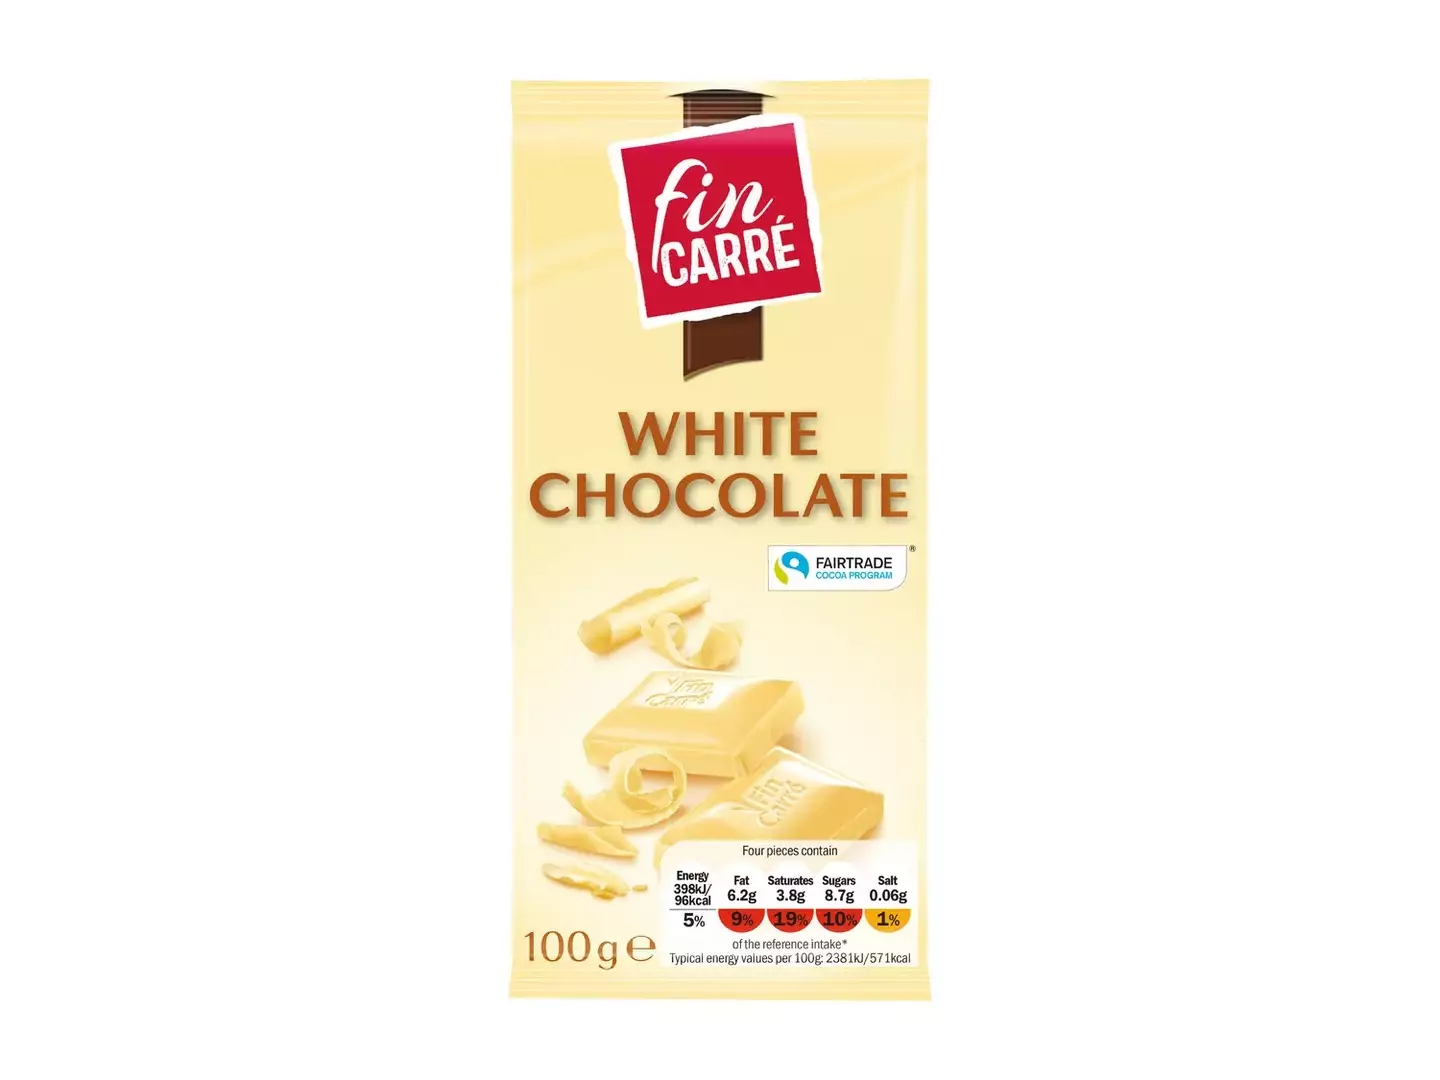 Fin Carre White Chocolate has been recalled.